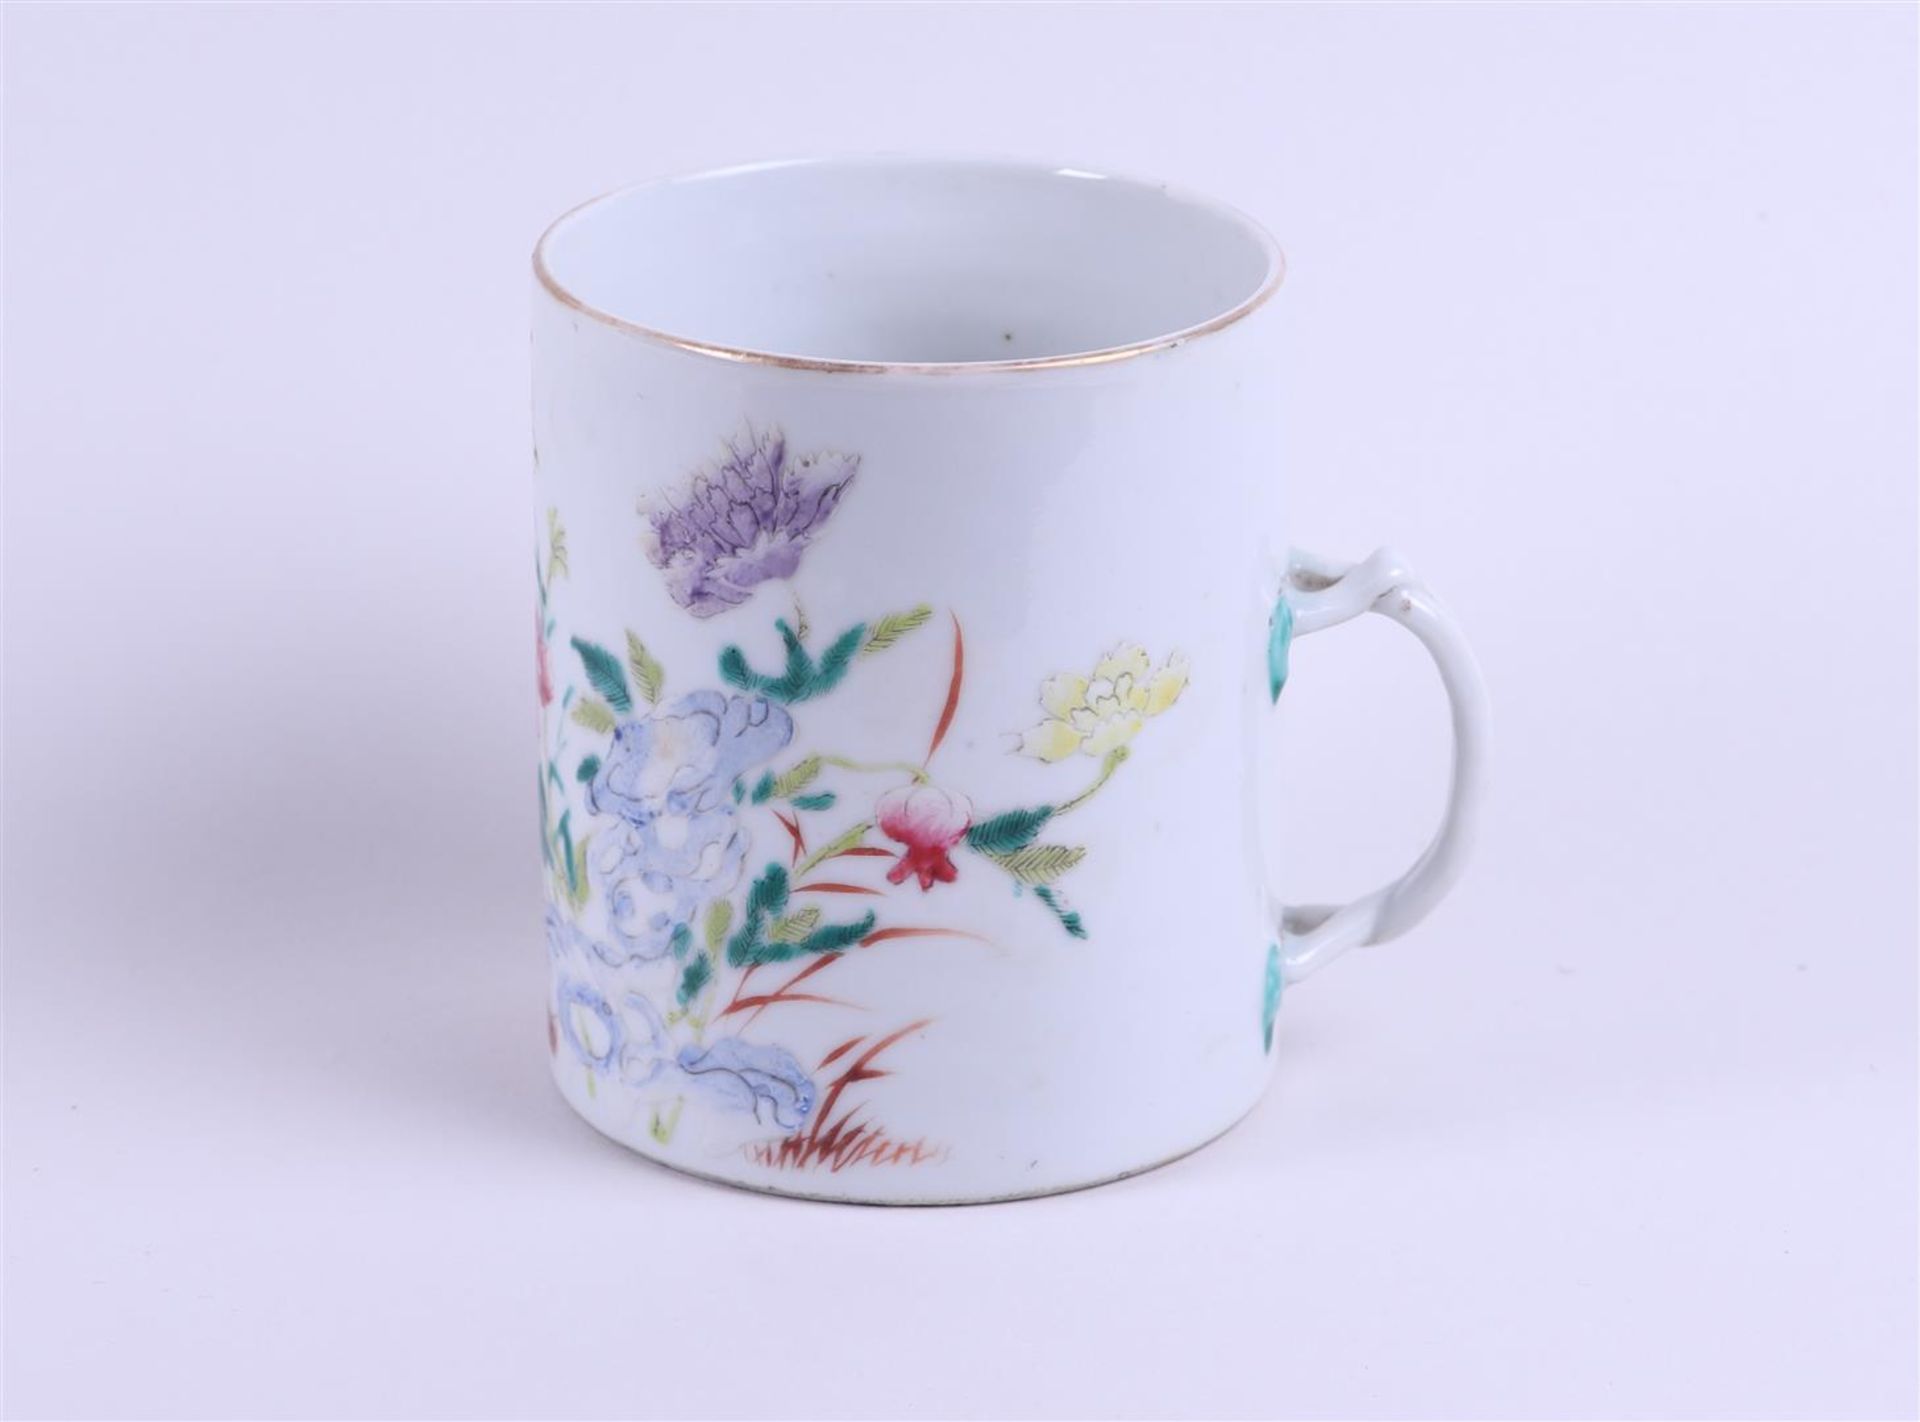 A porcelain Famille Rose cup with woven handle with rich floral decoration on rock decor with bird a